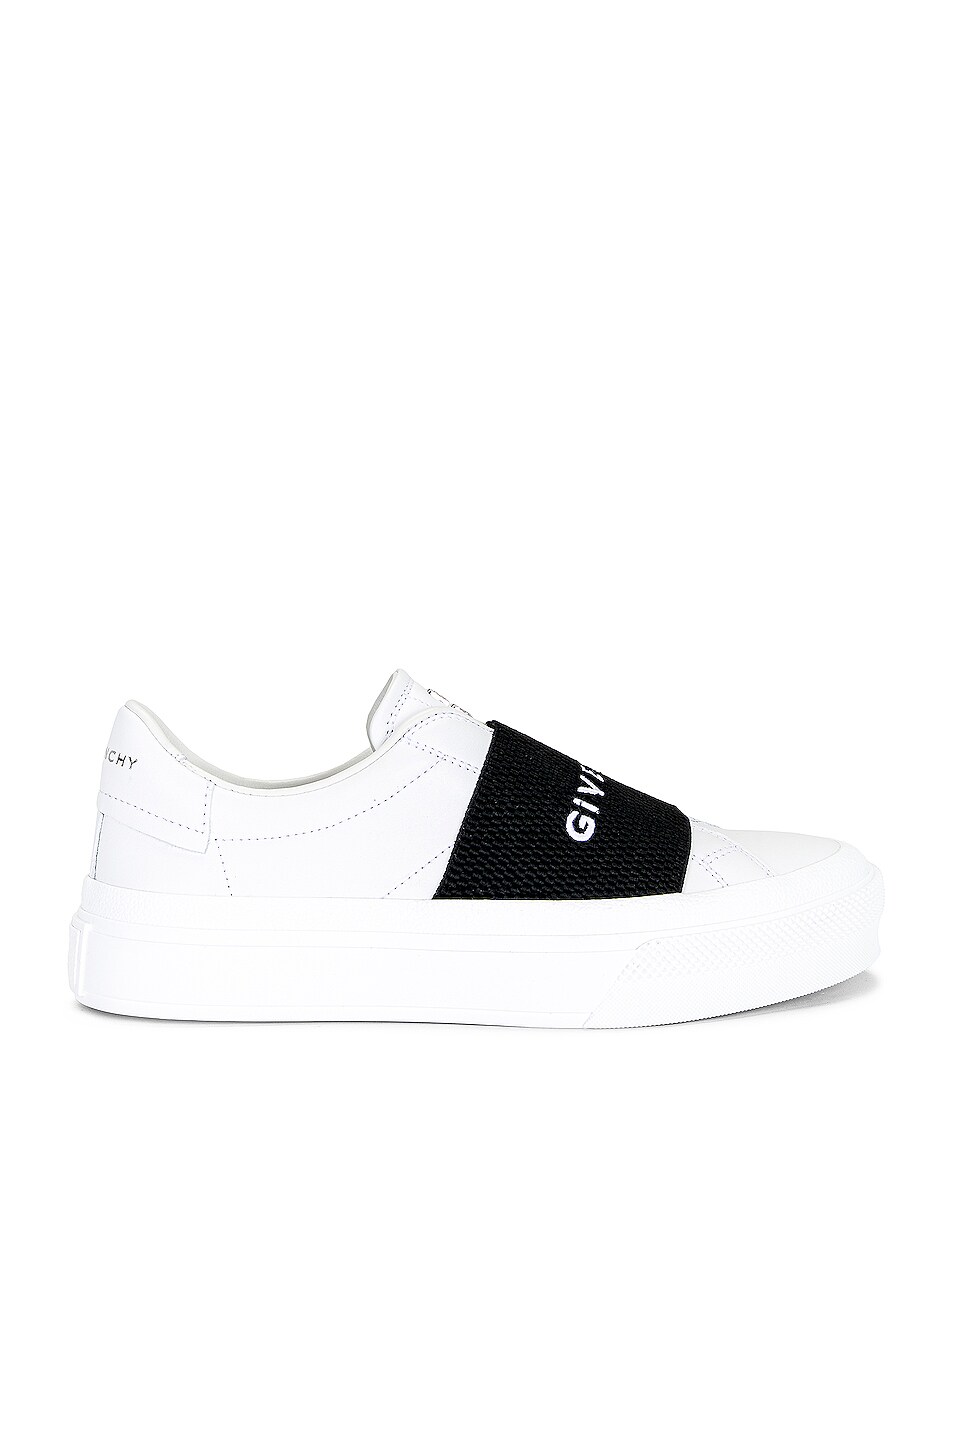 Image 1 of Givenchy City Sport Elastic Sneakers in White & Black